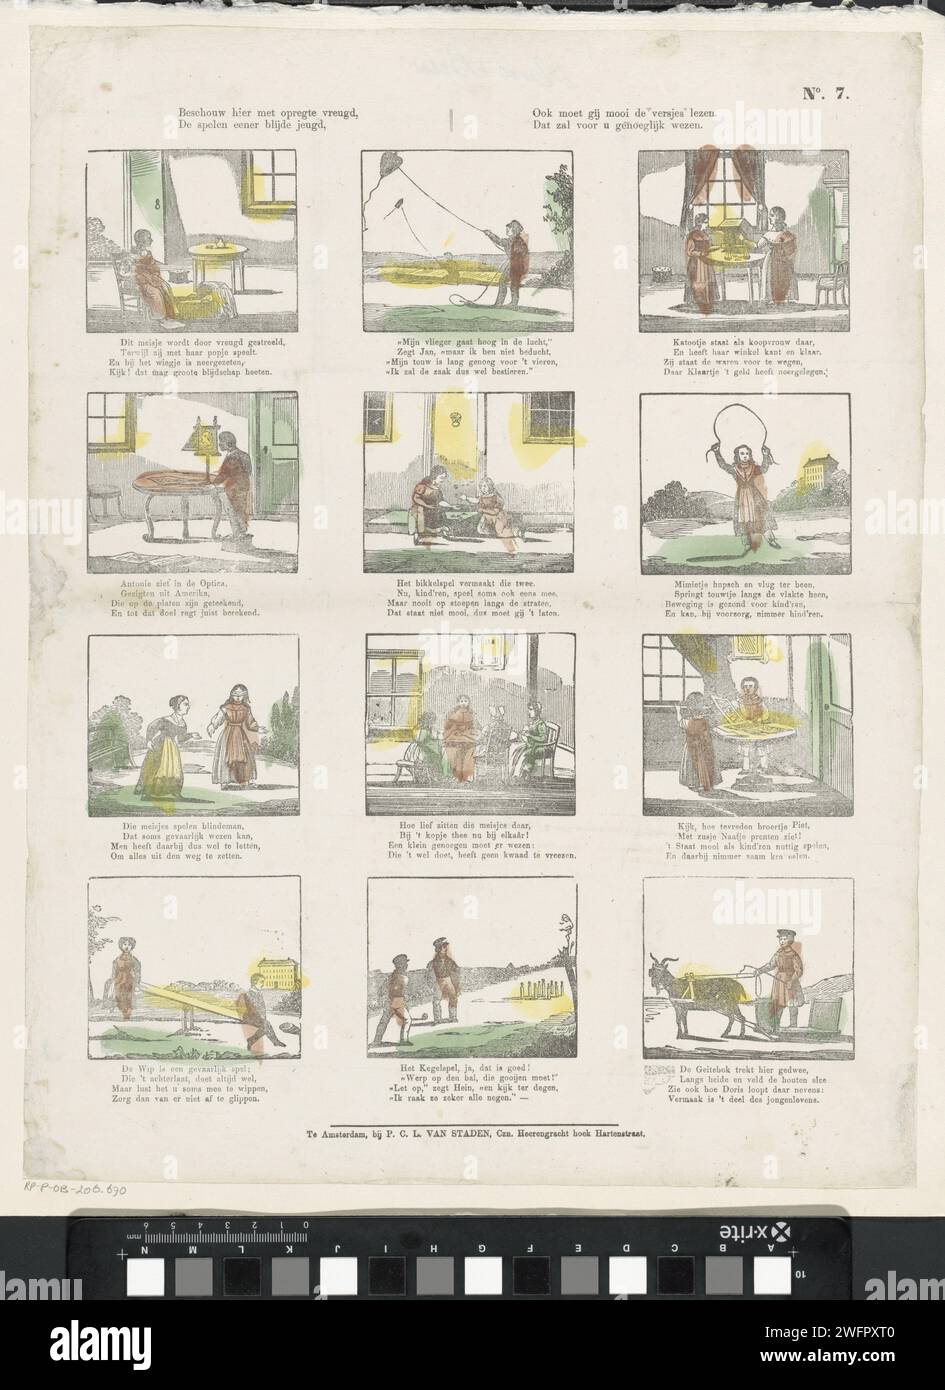 Consider here with a rule of joy, / the playing a happy youth, / also you have to read the verses nicely. / That will be a pleasant being for you, 1850 - 1870 print Leaf with 12 performances of children's games and activities, such as kites, jump rope and blind man. A four -line verse under each image. Numbered at the top right: No. 7. publisher: Amsterdamprint maker: Netherlands paper letterpress printing children's games and plays. seesaw. blind-man's buff. (flying a) kite. jumping-rope games Stock Photo